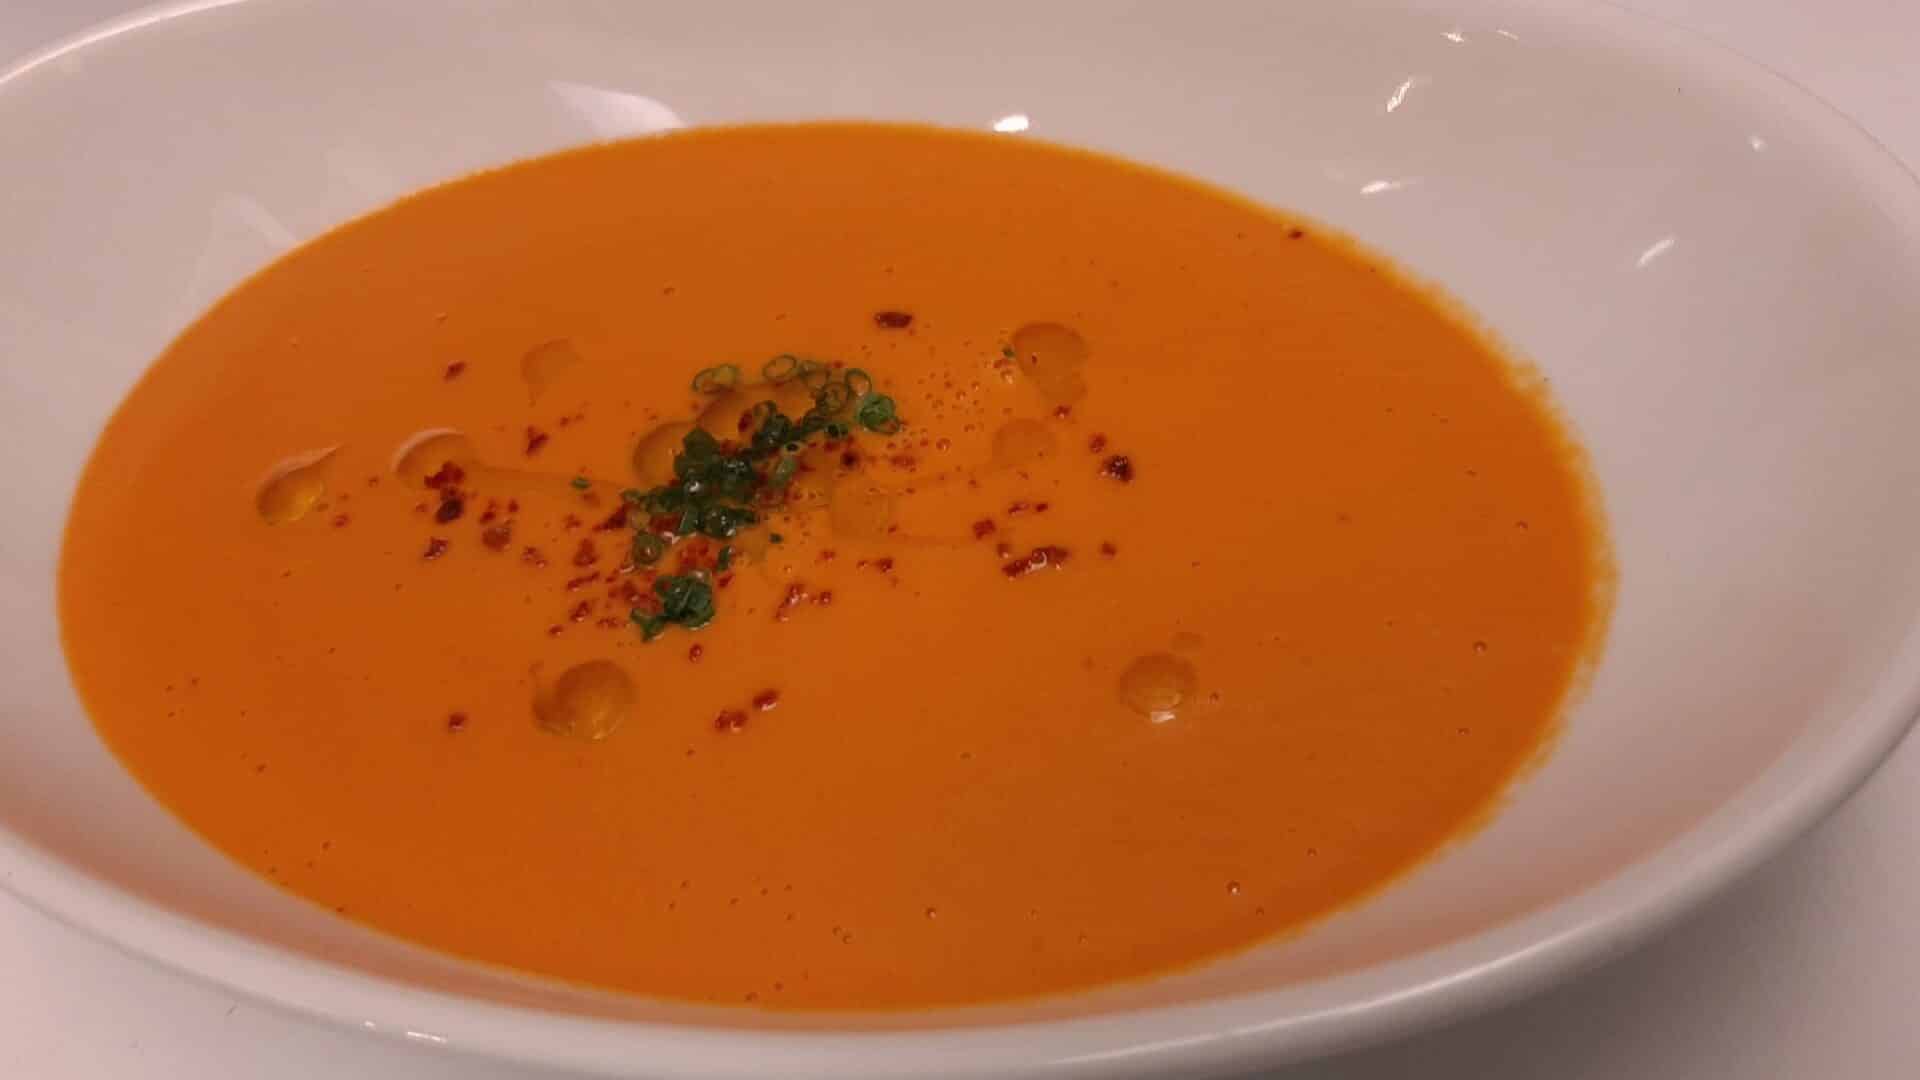 a white bowl filled with Tomato bisque soup sprinkled with sliced chives and drizzled with olive oil|heirloom tomatoes piled high|Best tomato bisque soup recipe|tomatoes of various shapes